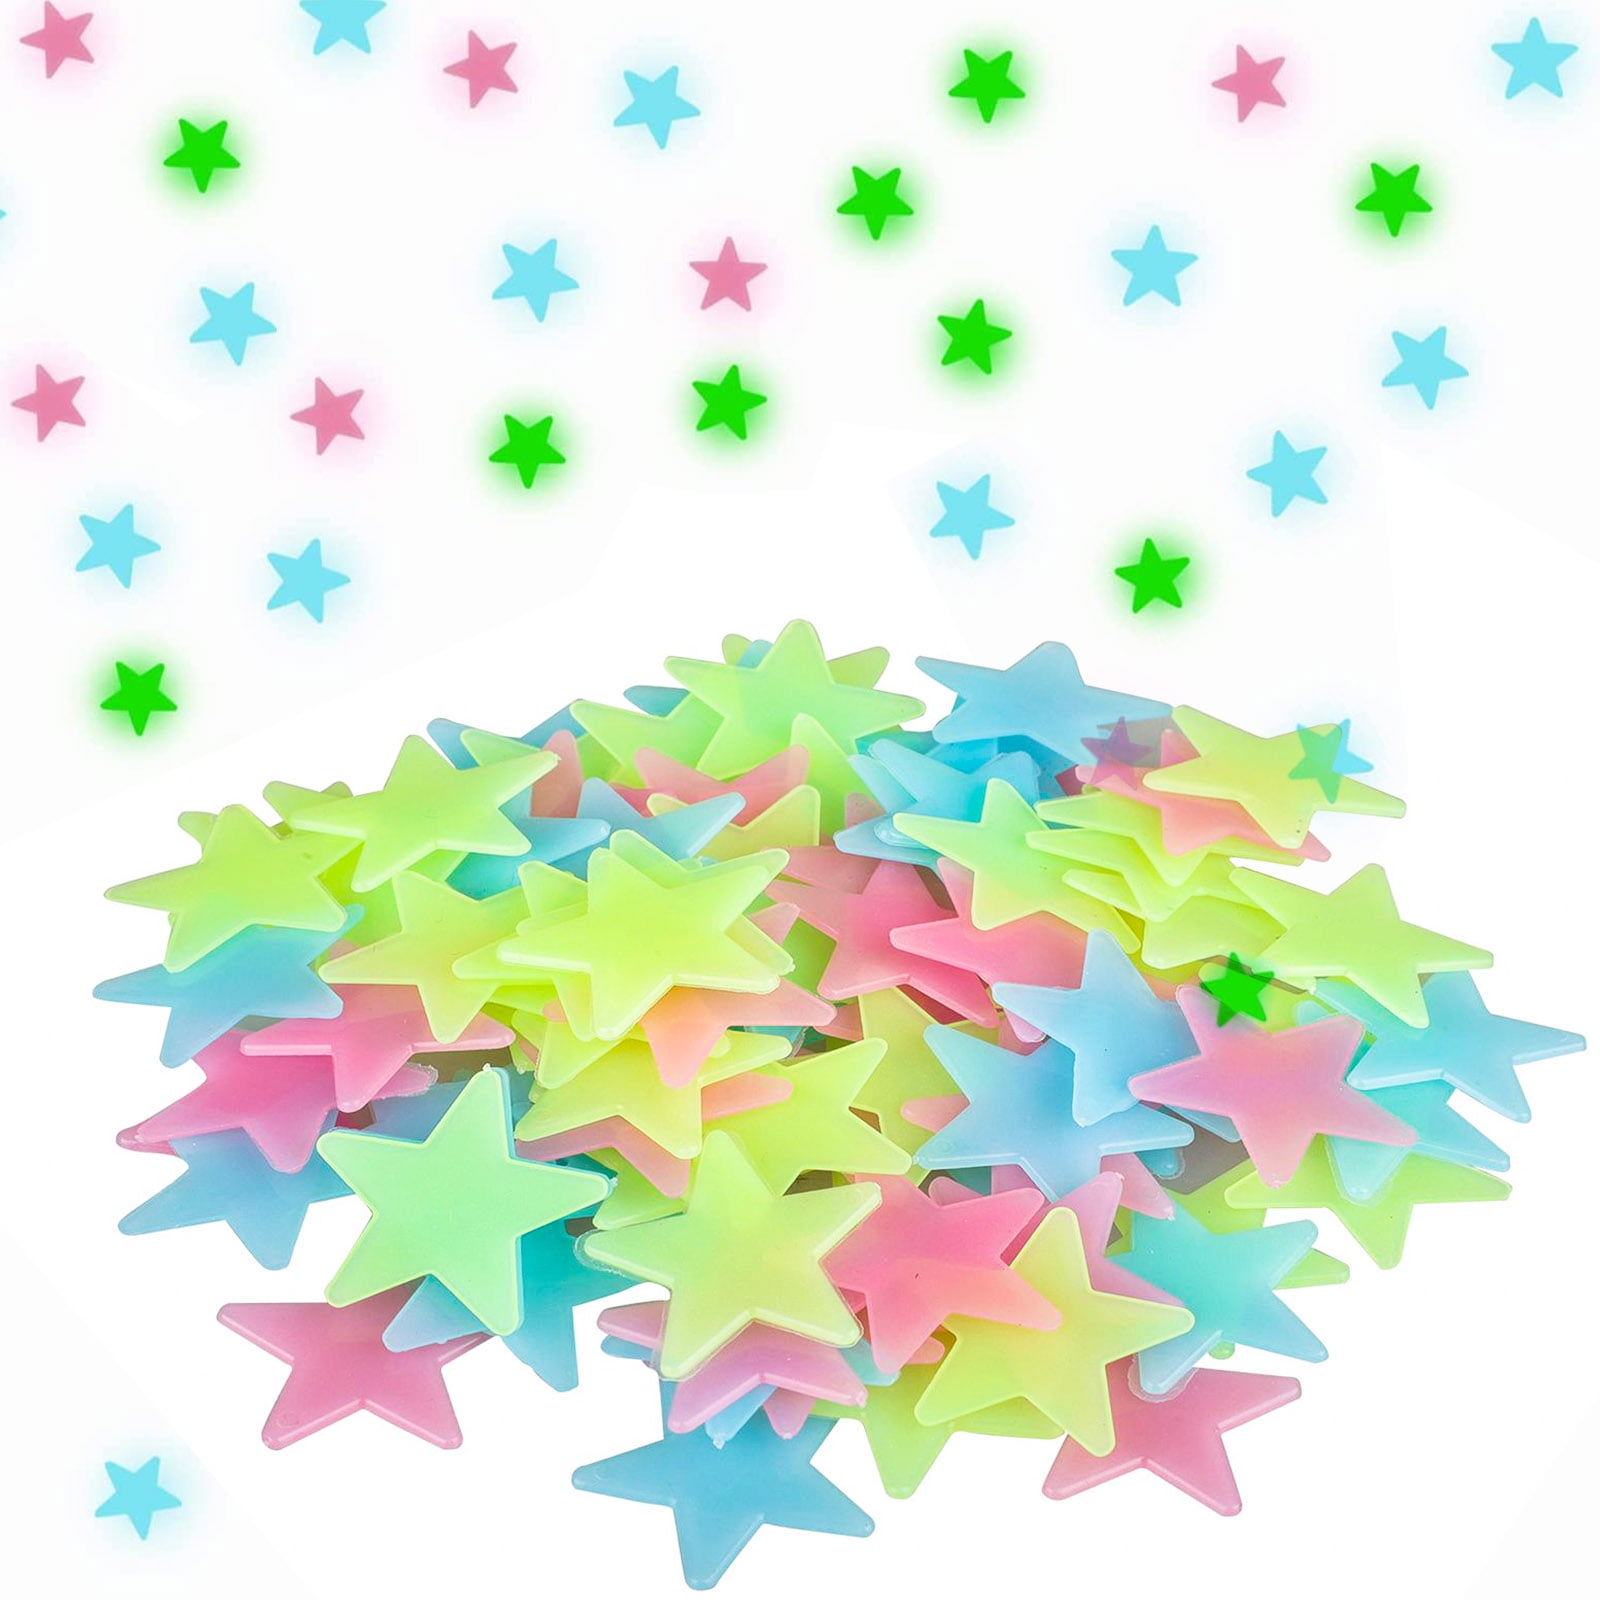 50 Assorted Shape and Color Stickers for Kids Sunny Days Entertainment CoComelon Glow in The Dark Stars Peel and Stick Wall Decals,Multi 